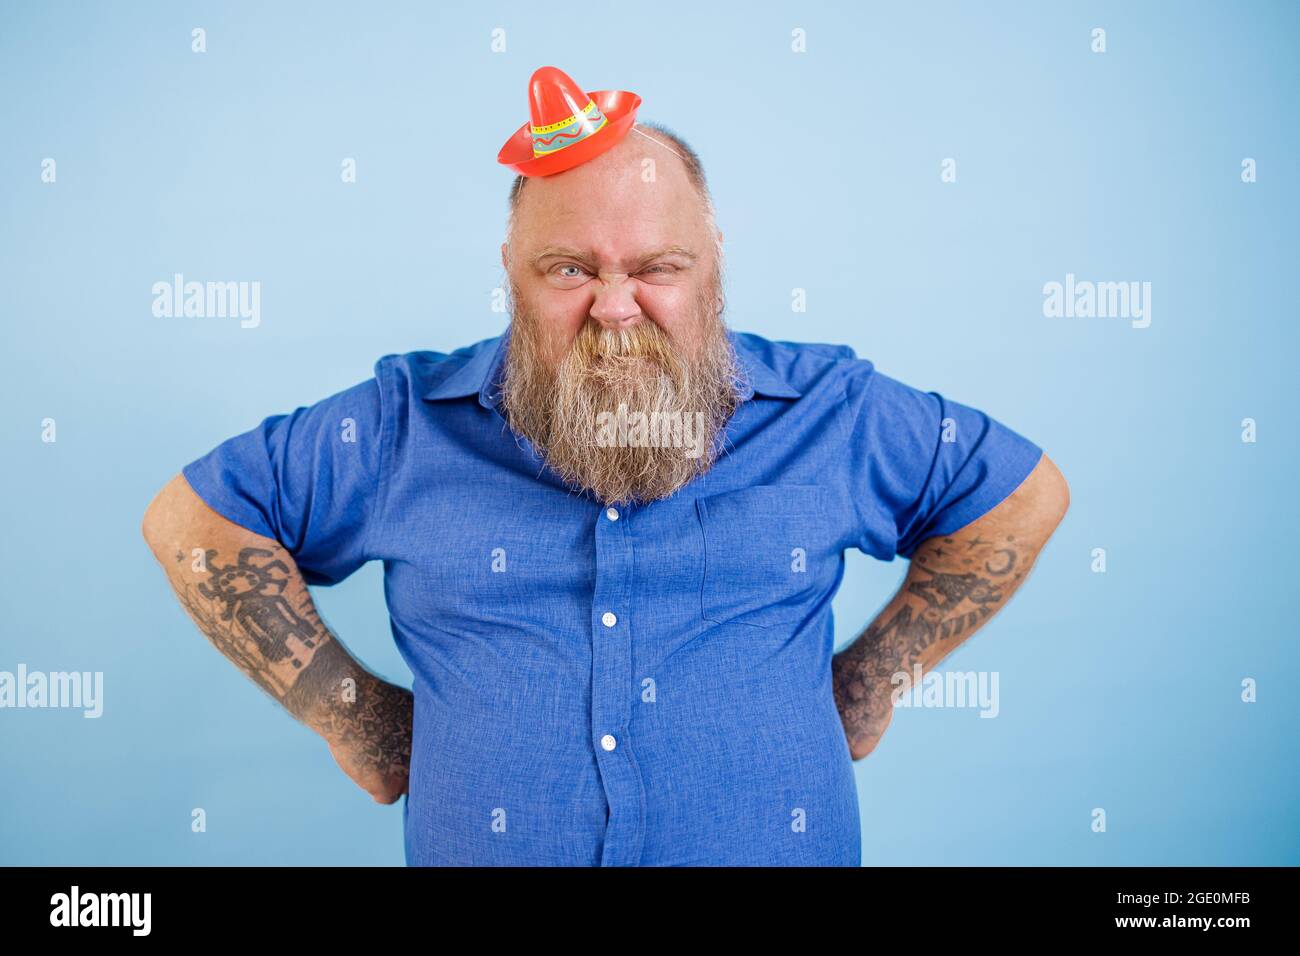 Funny plus size man wearing small sombrero holds hands on waist grimacing on blue background Stock Photo